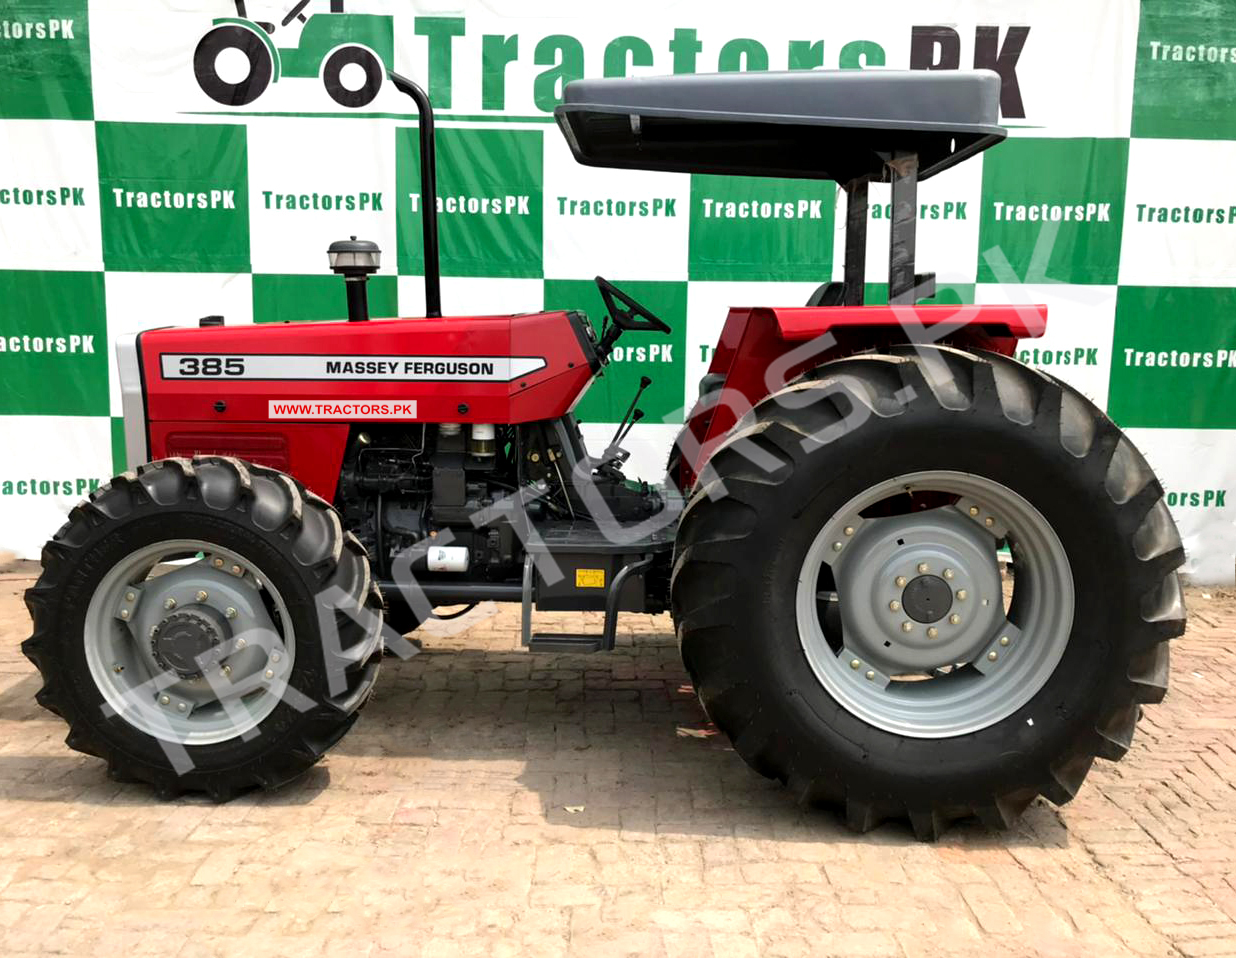 Massey Ferguson 385 4WD Tractor for Sale - MF 385 4WD Tractor by Tractors PK